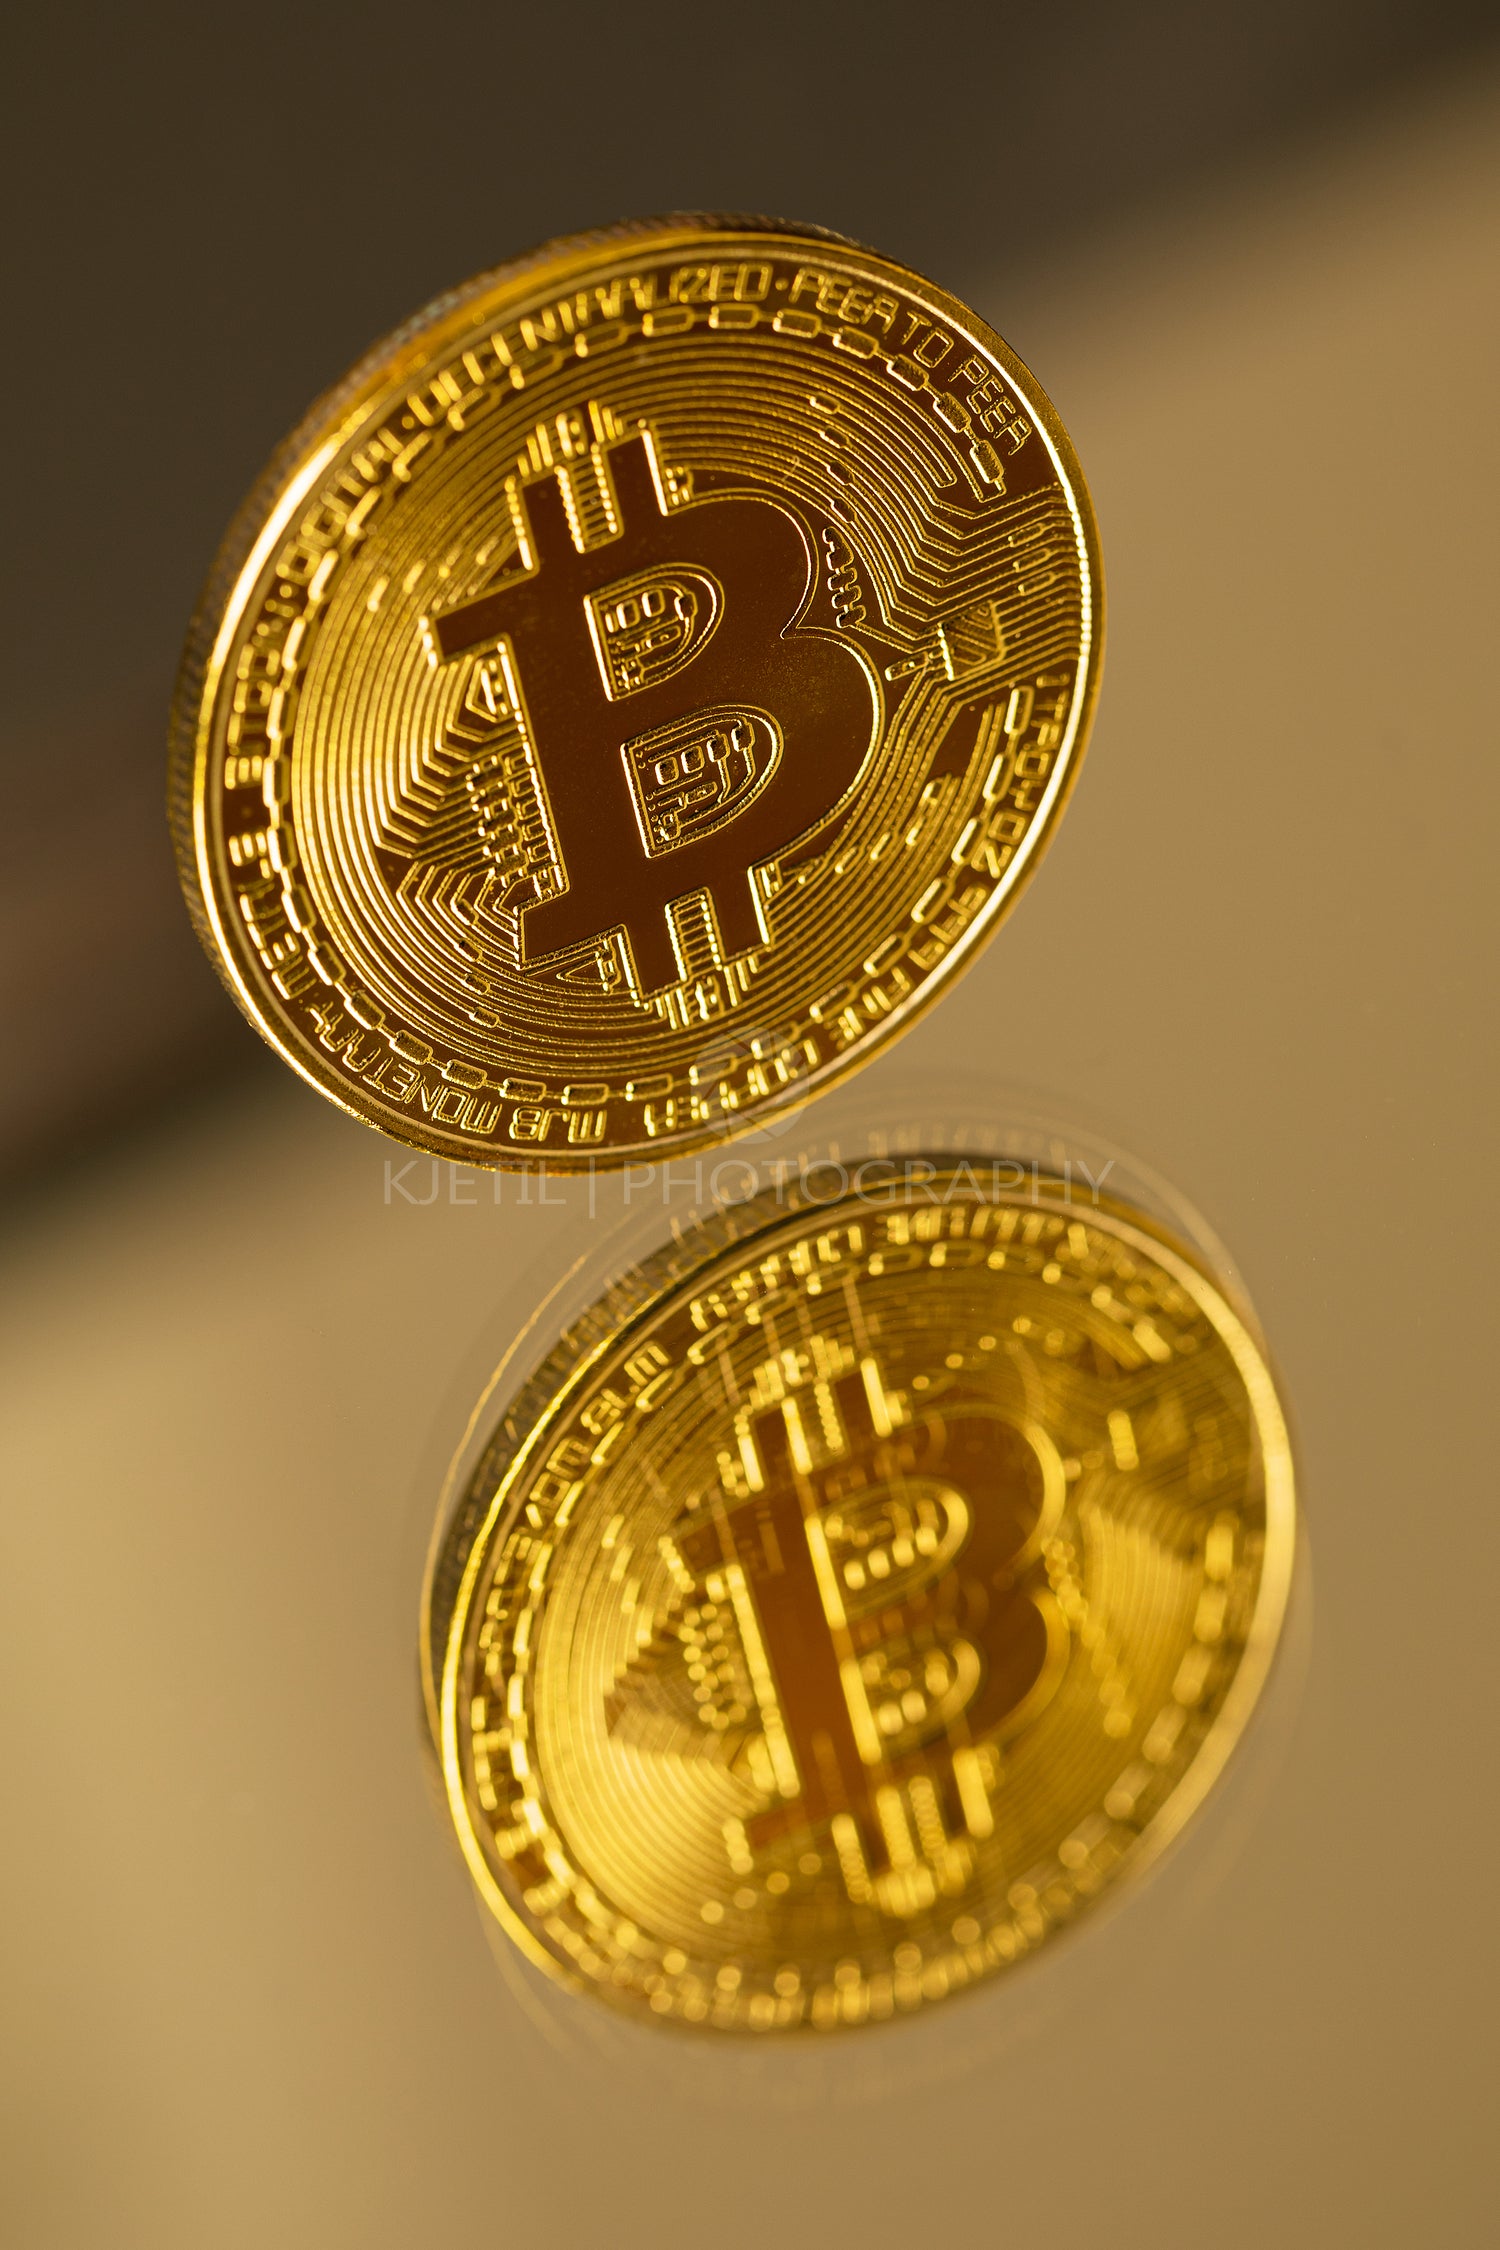 Gold Bitcoin Cryptocurrency Coin With Reflection On Mirror